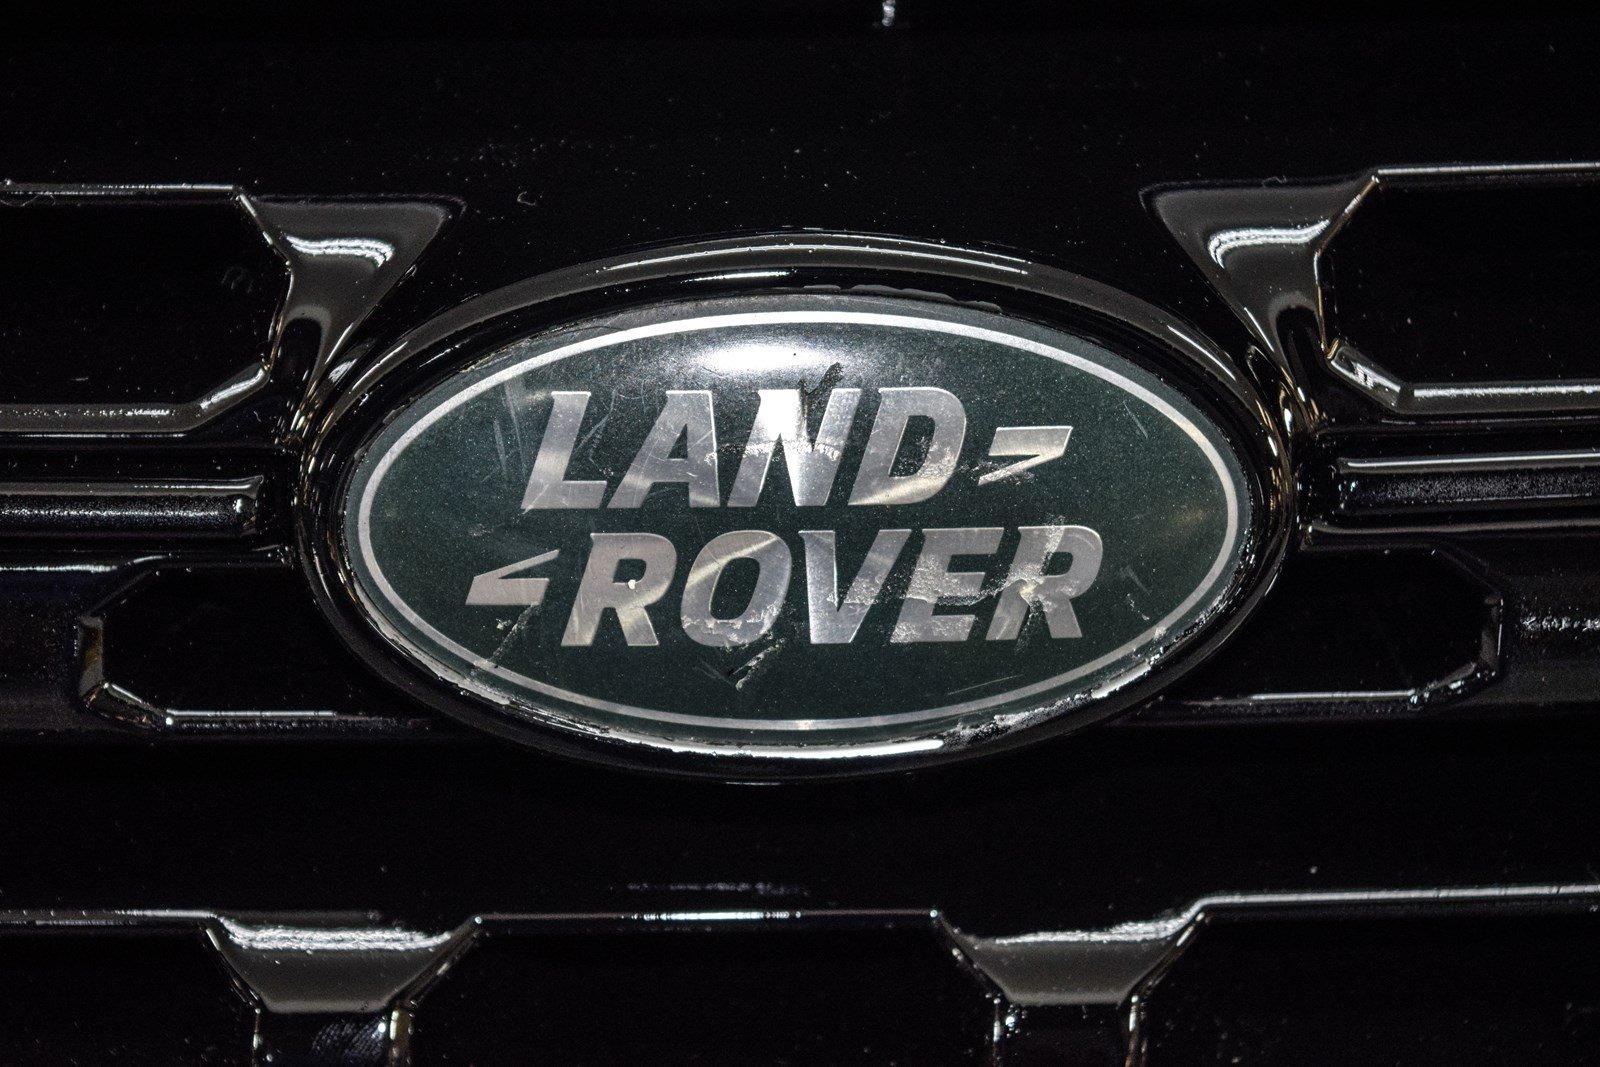 Used 2014 Land Rover Range Rover Supercharged for sale Sold at Gravity Autos Marietta in Marietta GA 30060 45